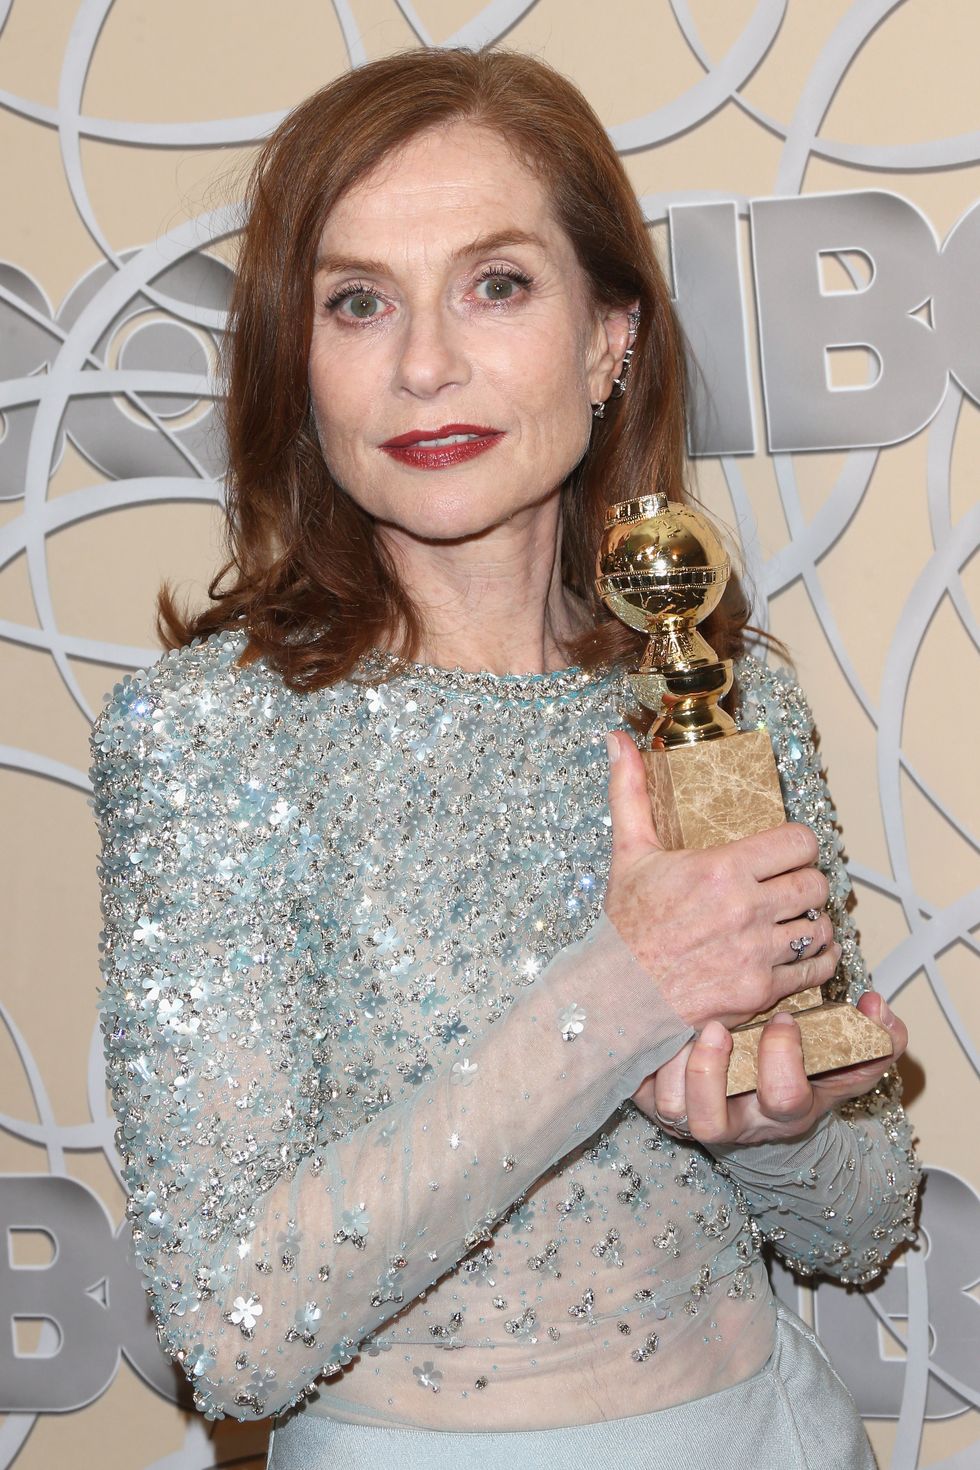 <p>Directed by Paul Verhoeven, Huppert has nabbed her first Academy Award nomination for her role as Michèle in controversial psychological thriller&nbsp;<em data-redactor-tag="em" data-verified="redactor">Elle</em>. The plot centers on a woman who is raped in her home by a man in a ski mask, then responds to the trauma in an unexpected&nbsp;way.</p>